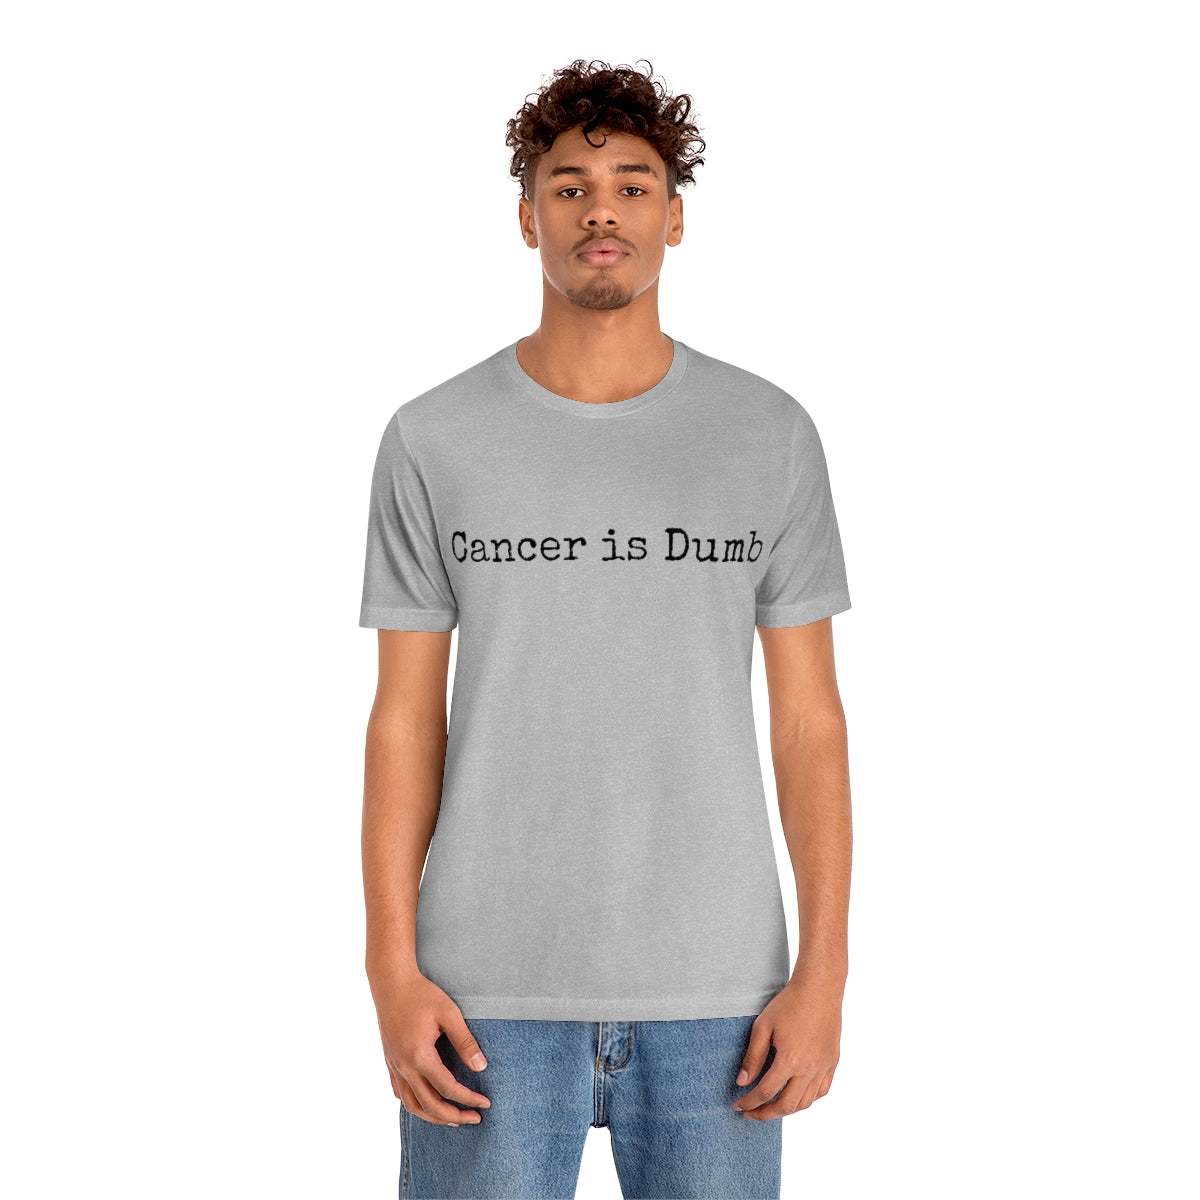 Unisex Jersey Short Sleeve Tee T Shirt tshirt Mens Womens Apparel Clothing Anti Cancer Cancer is Dumb Survivor Support Humorous Funny